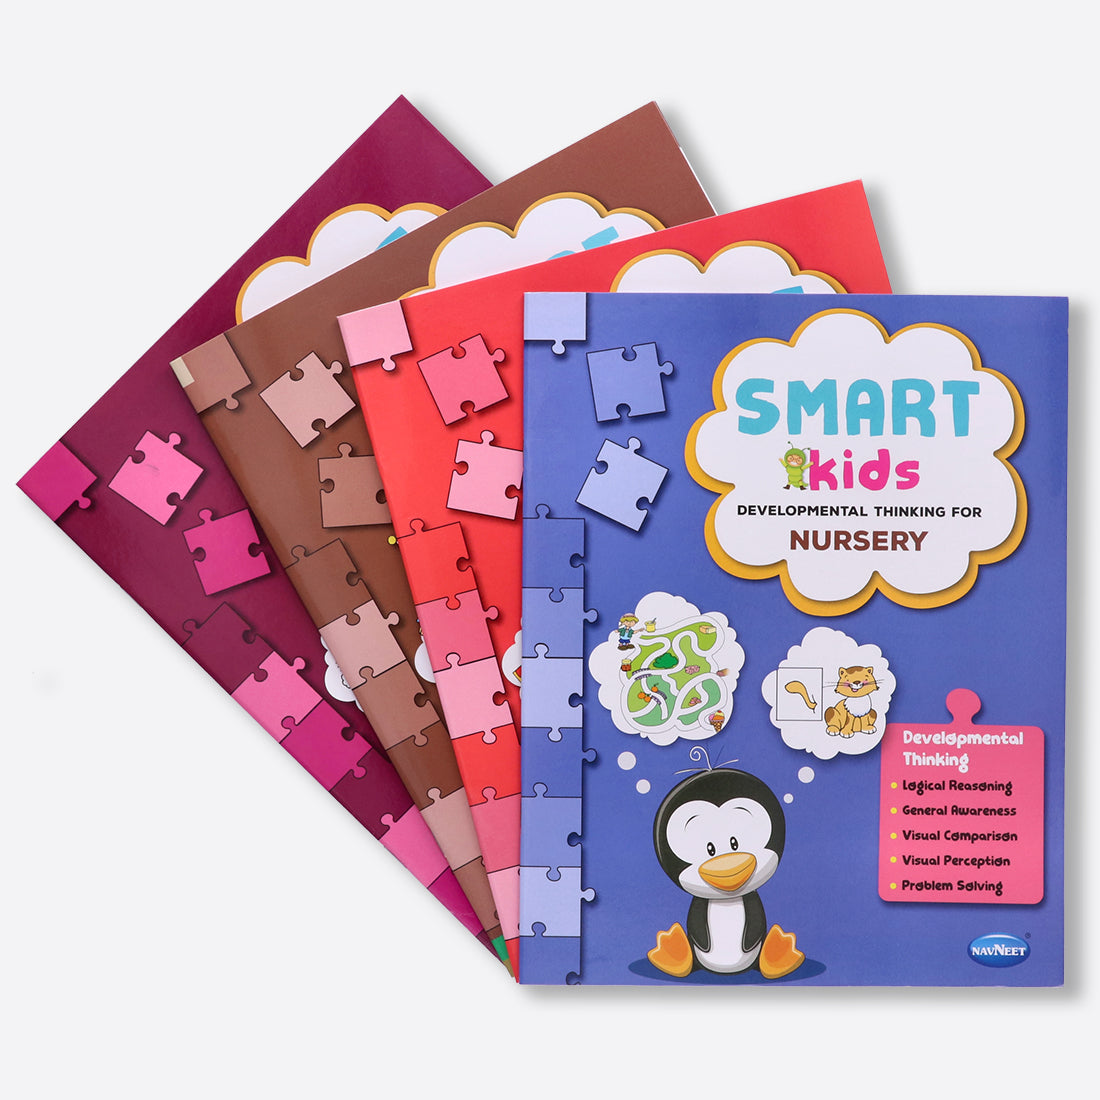 Navneet Smart Kids Activity Book for Nursery Kids- Develops Developmental Thinking, Pre-Reading Skills, Pre-Writing Skills, Pre-Math Skills- Learning and Education- Pack of 4